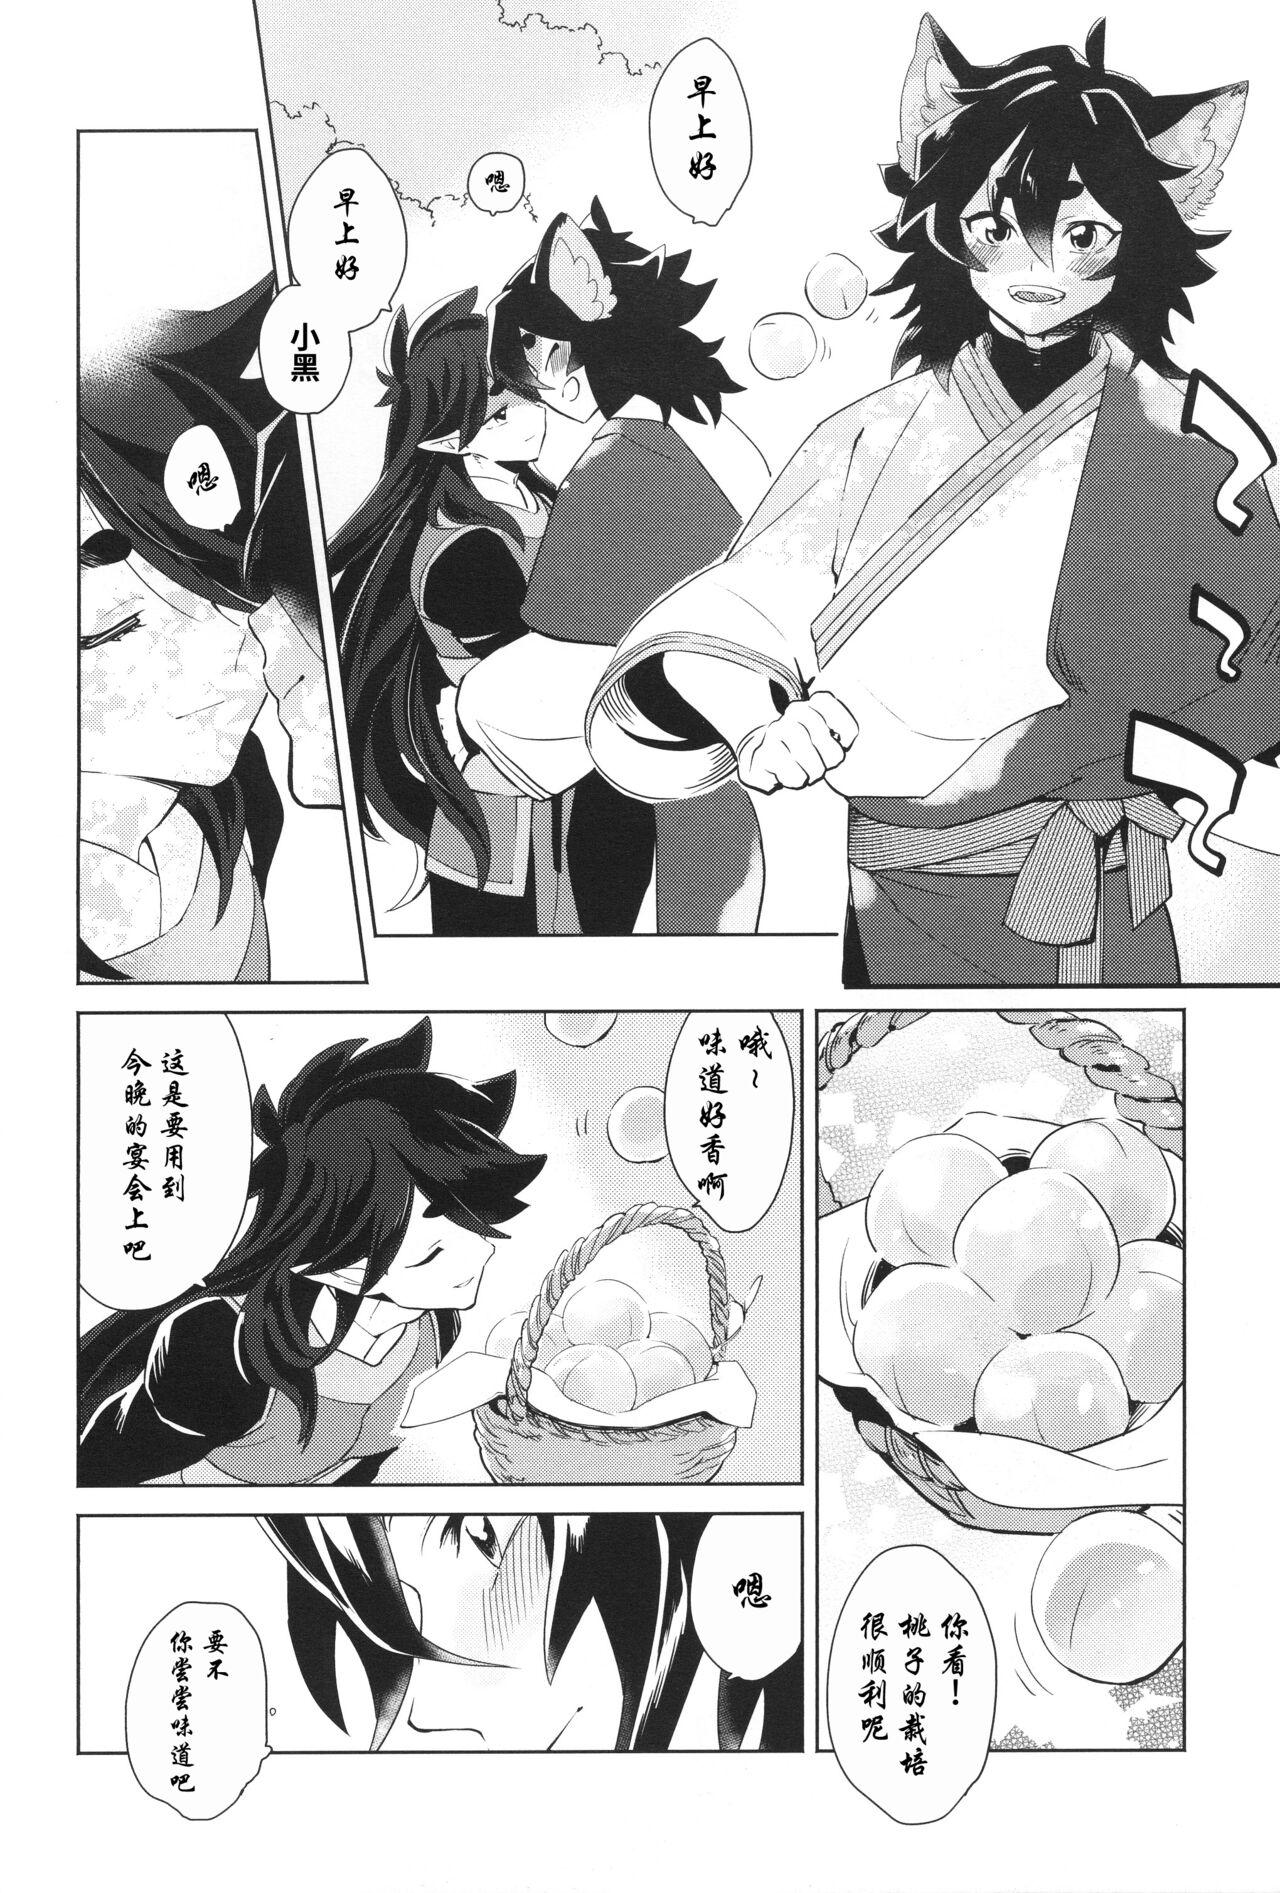 Blacksonboys 籠の鳥 - The legend of luo xiaohei Game - Page 5